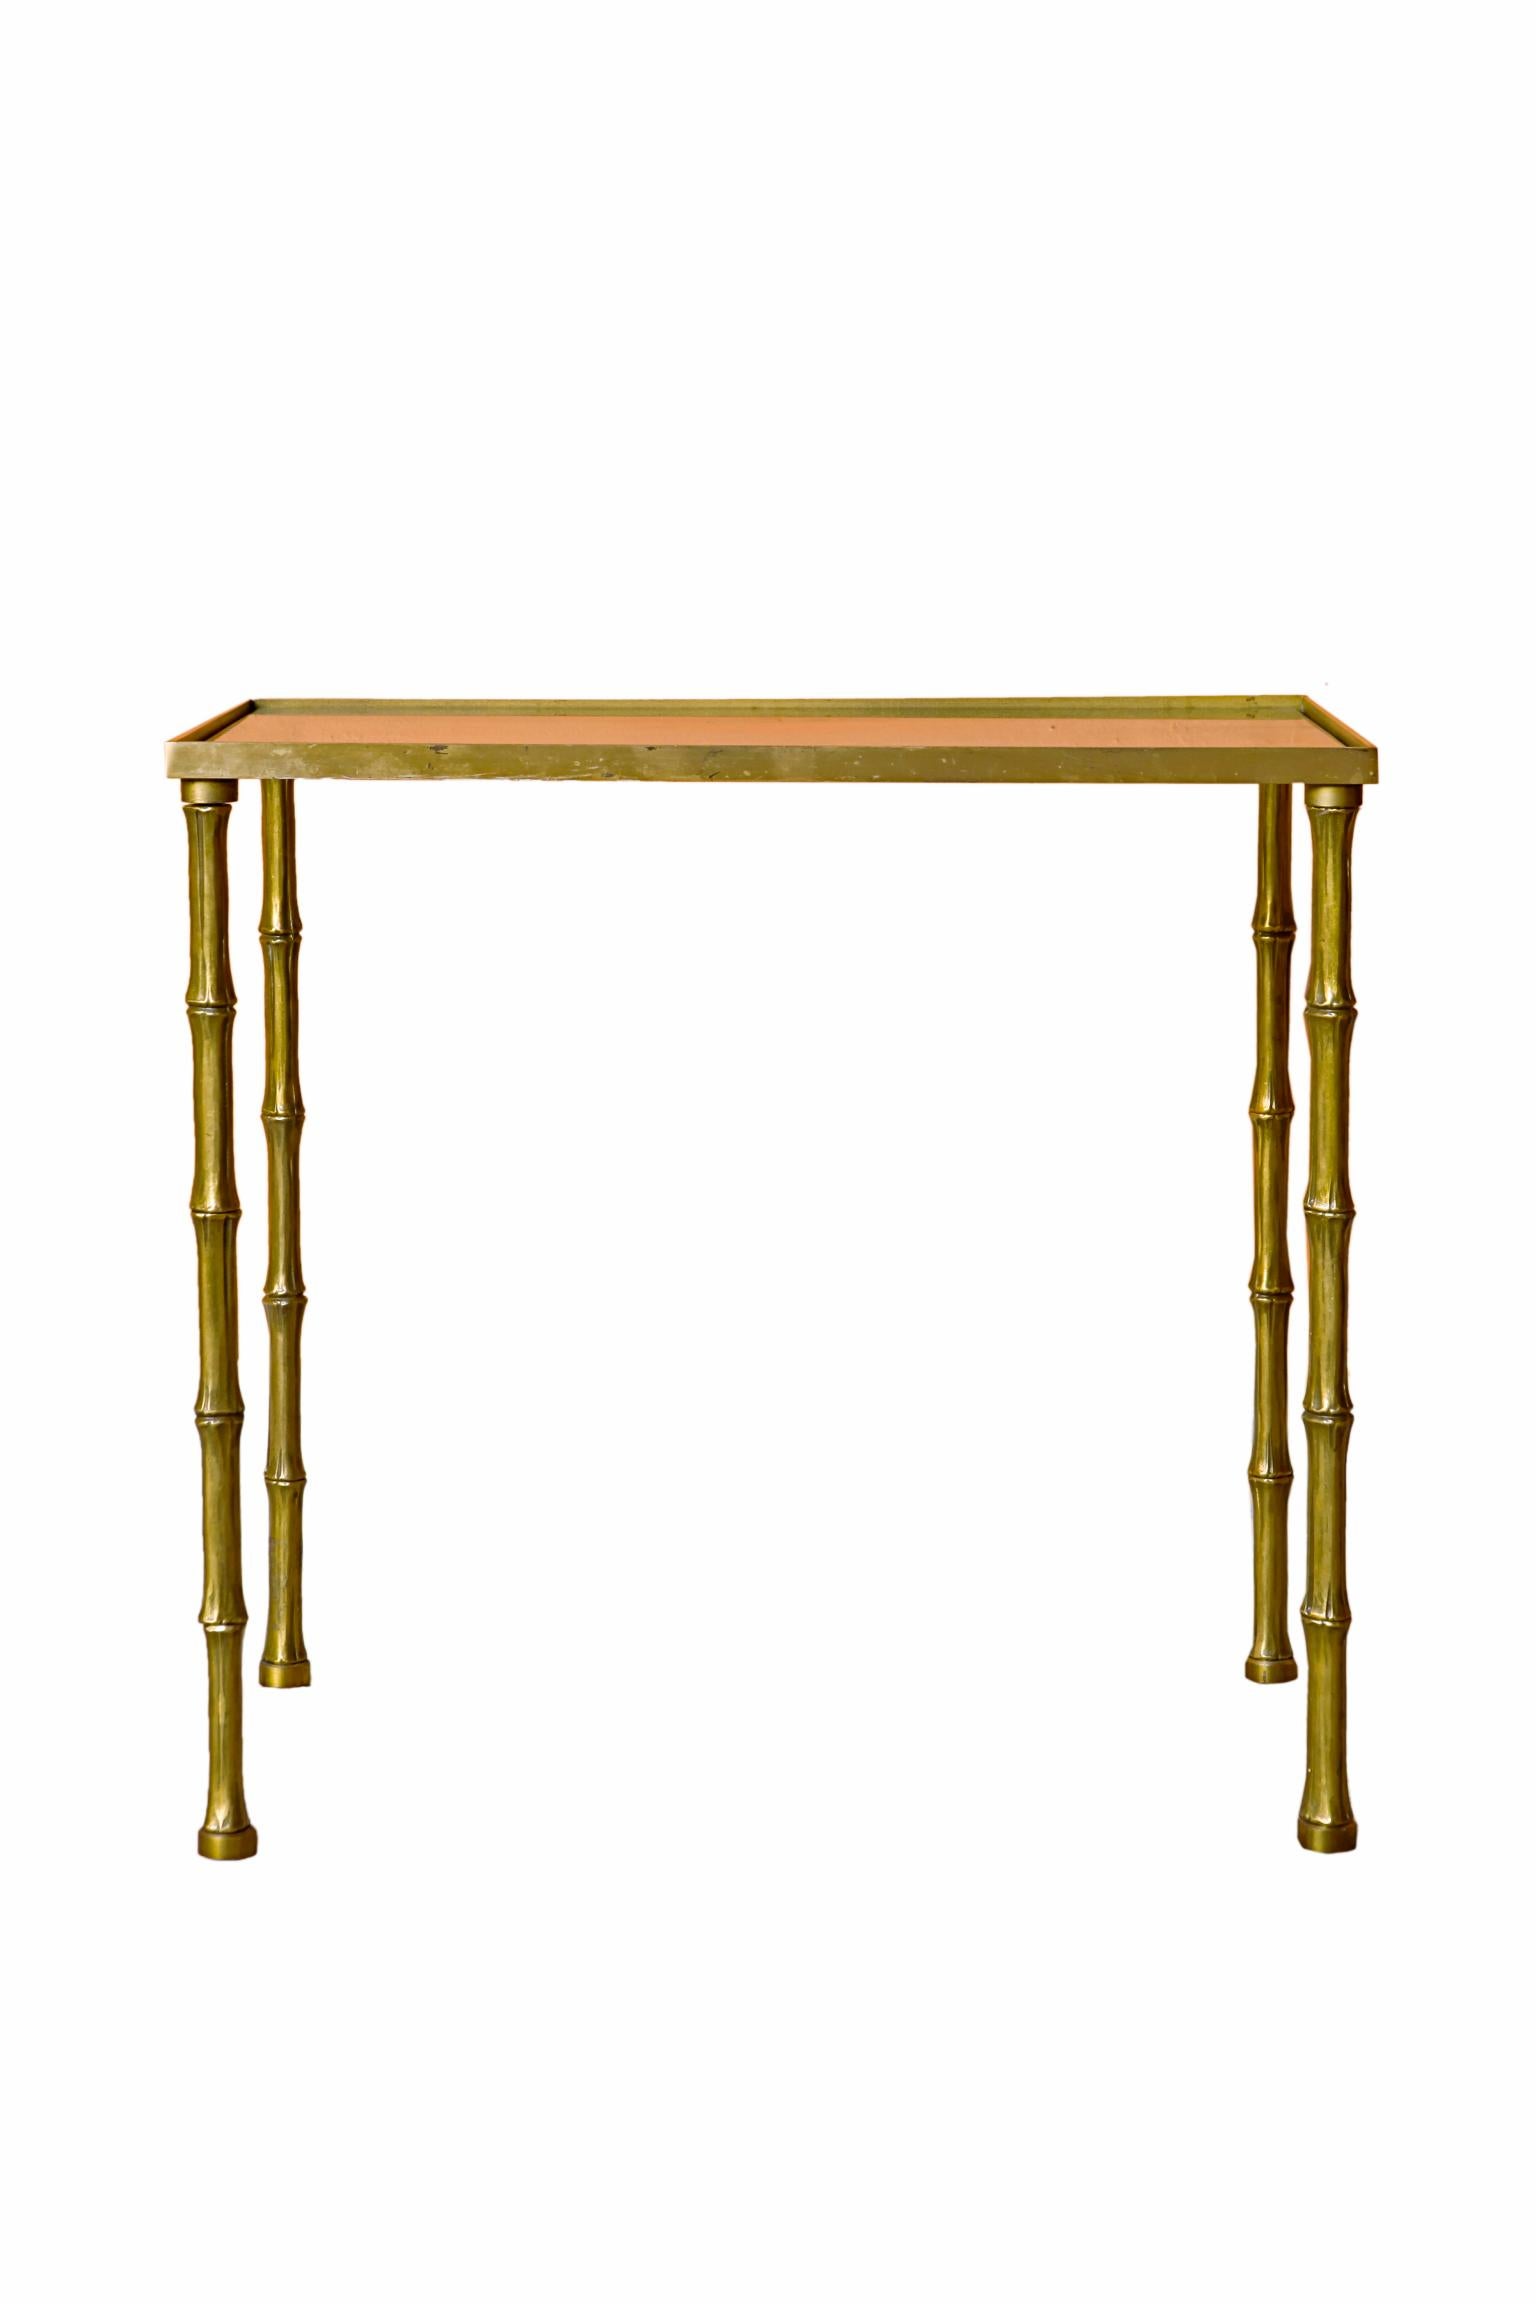 A 20th century french Maison Bagues side table or accent table.
A rectangular smoked glass top inset on a polished brass base above four faux bamboo legs.

It is part of a set together with a floor lamp. Can be bought together or separately.